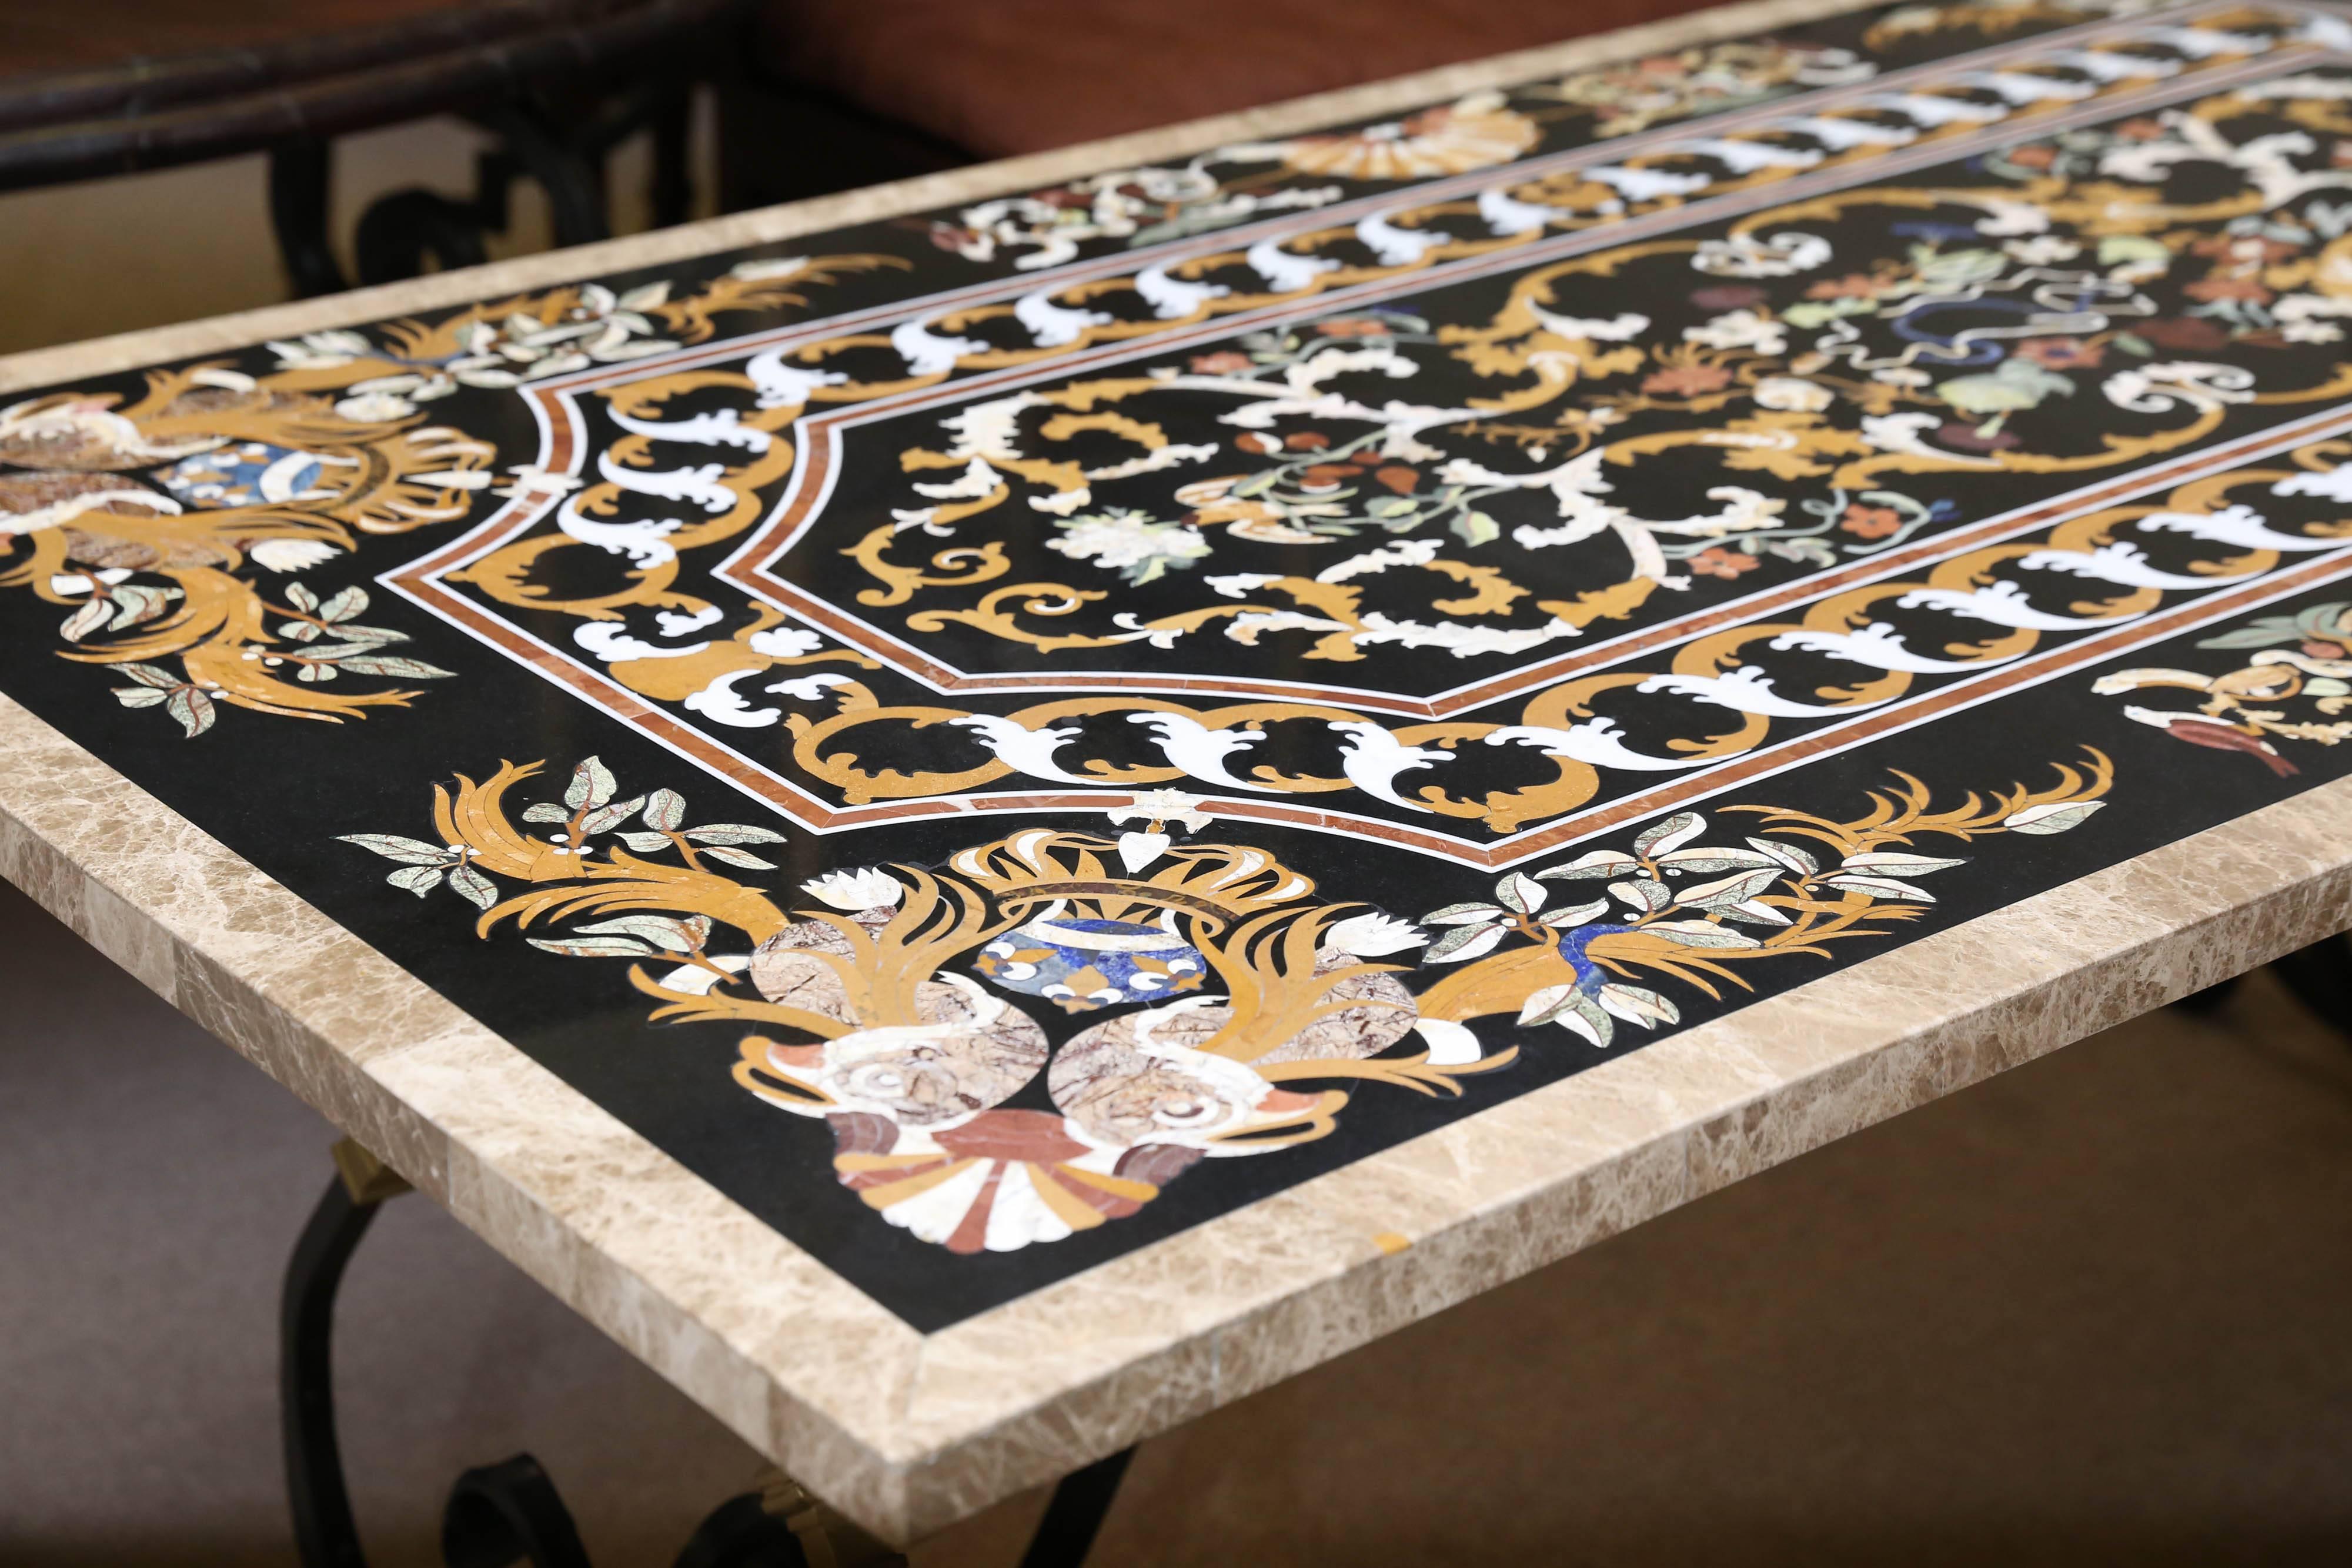 This heavily inlaid breakfast table is supported by hand-forged wrought iron base. The surface is scratch resistant as hard stones were used for inlay. Intricately inlaid with rare marbles and hard stones.